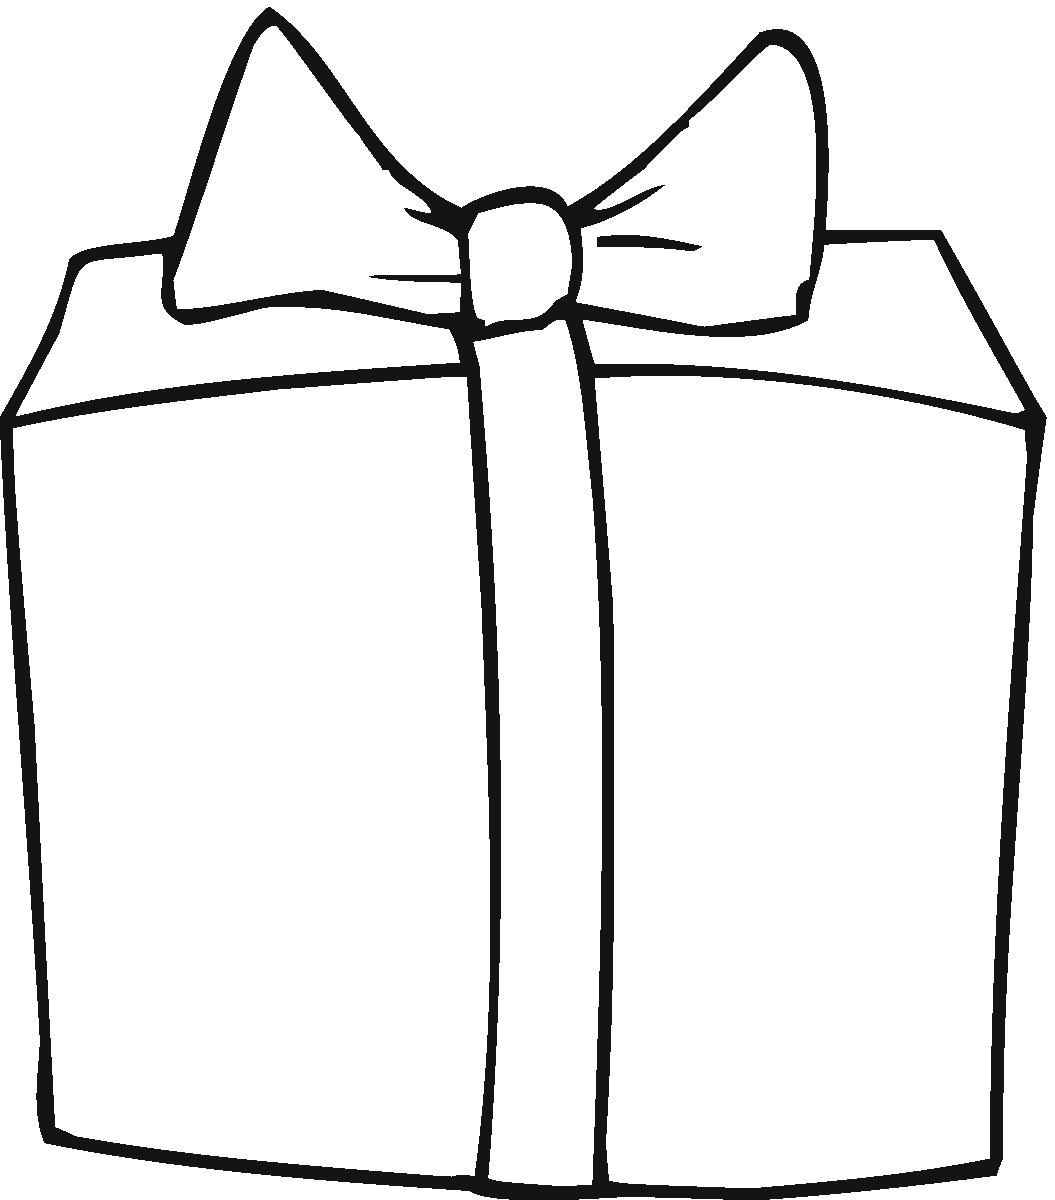 Gift Tag Outline - ClipArt Best